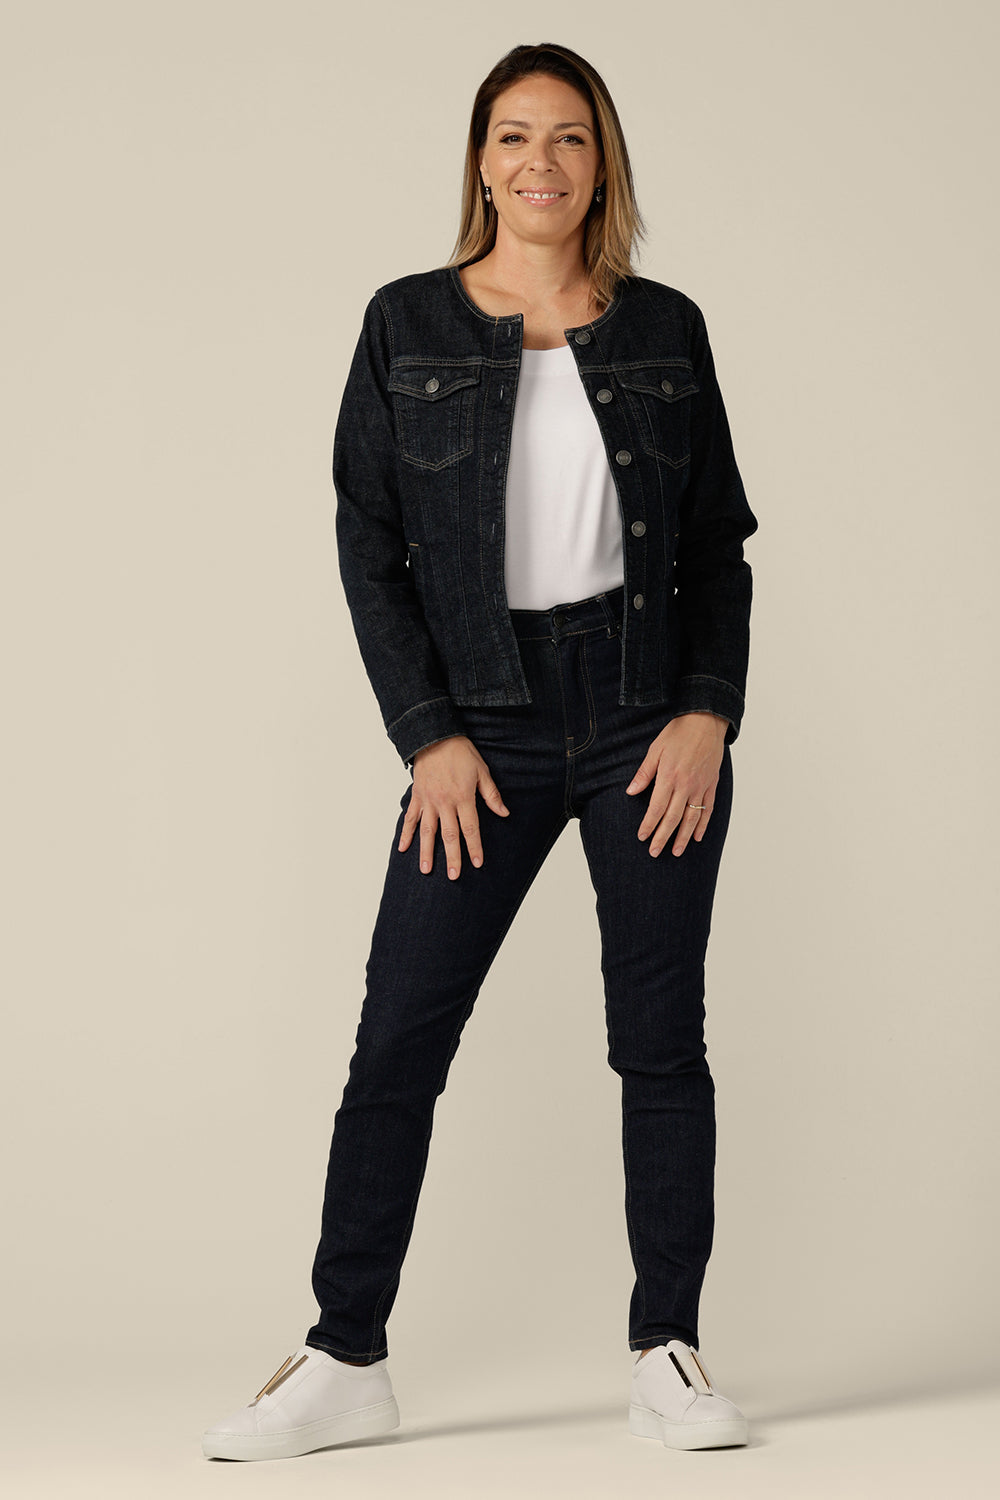 A collarless denim jacket in size 8 is worn with white bamboo jersey T-shirt and super-stretch skinny jeans. Ethical and sustainable, and made in partnership with Outland Denim, this denim jacket is tailored to fit women in sizes 8 to 24 by Australian and New Zealand women's clothing label, L&F.